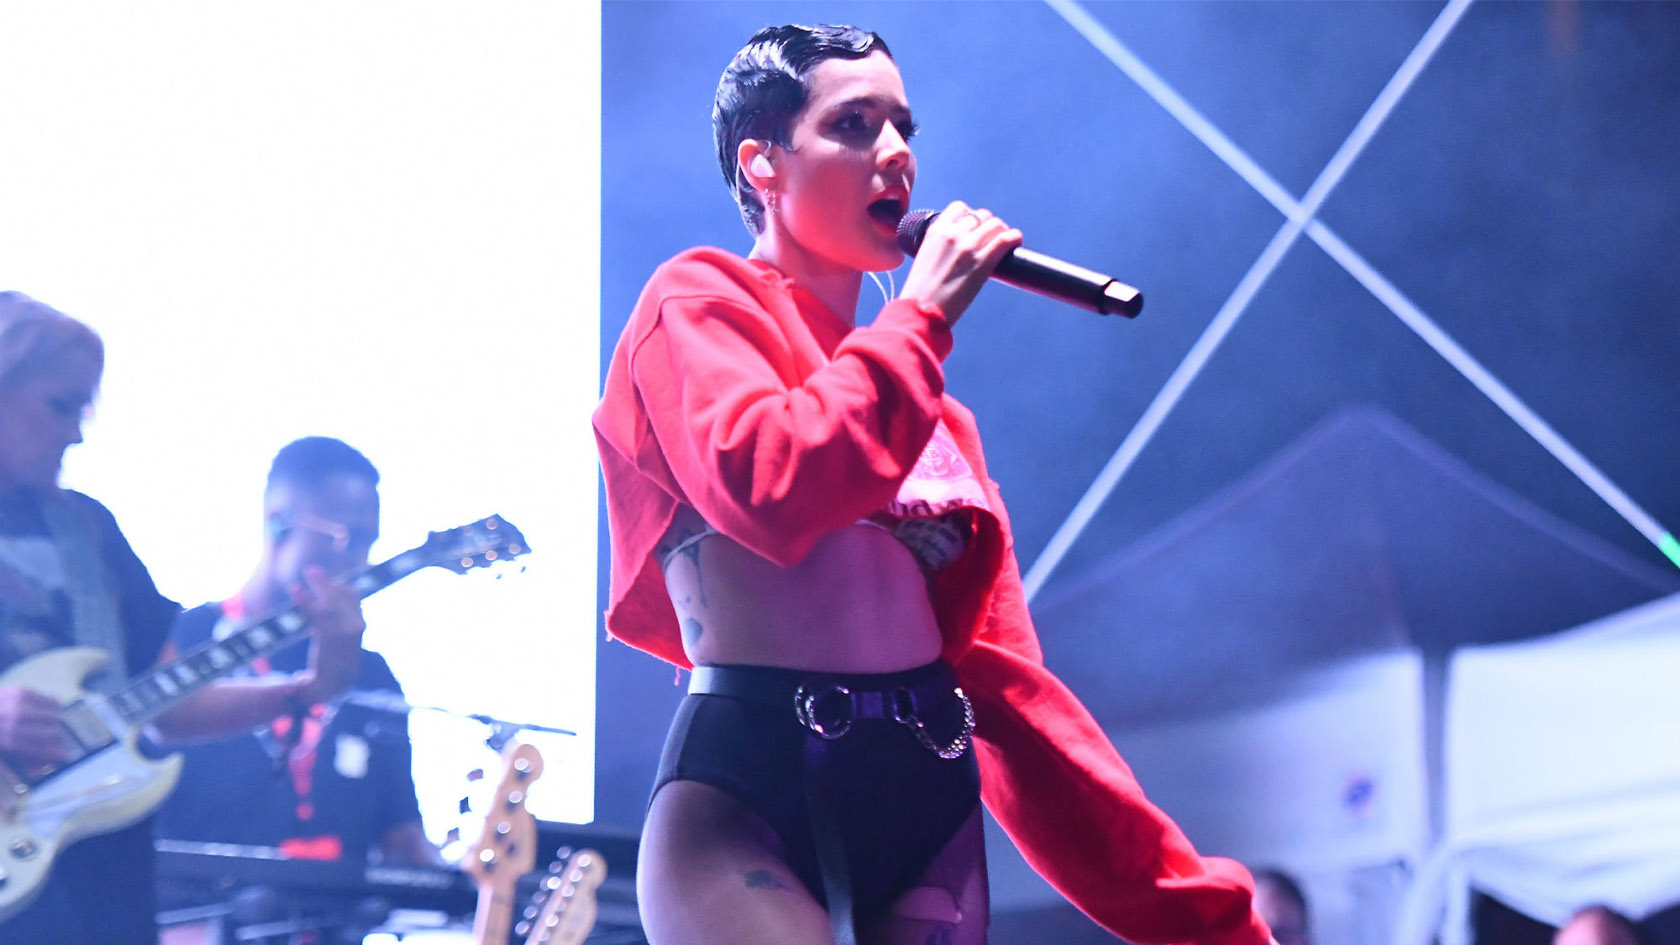 Halsey Exposes The Grammys Following 'Manic' Snub | lifewithoutandy